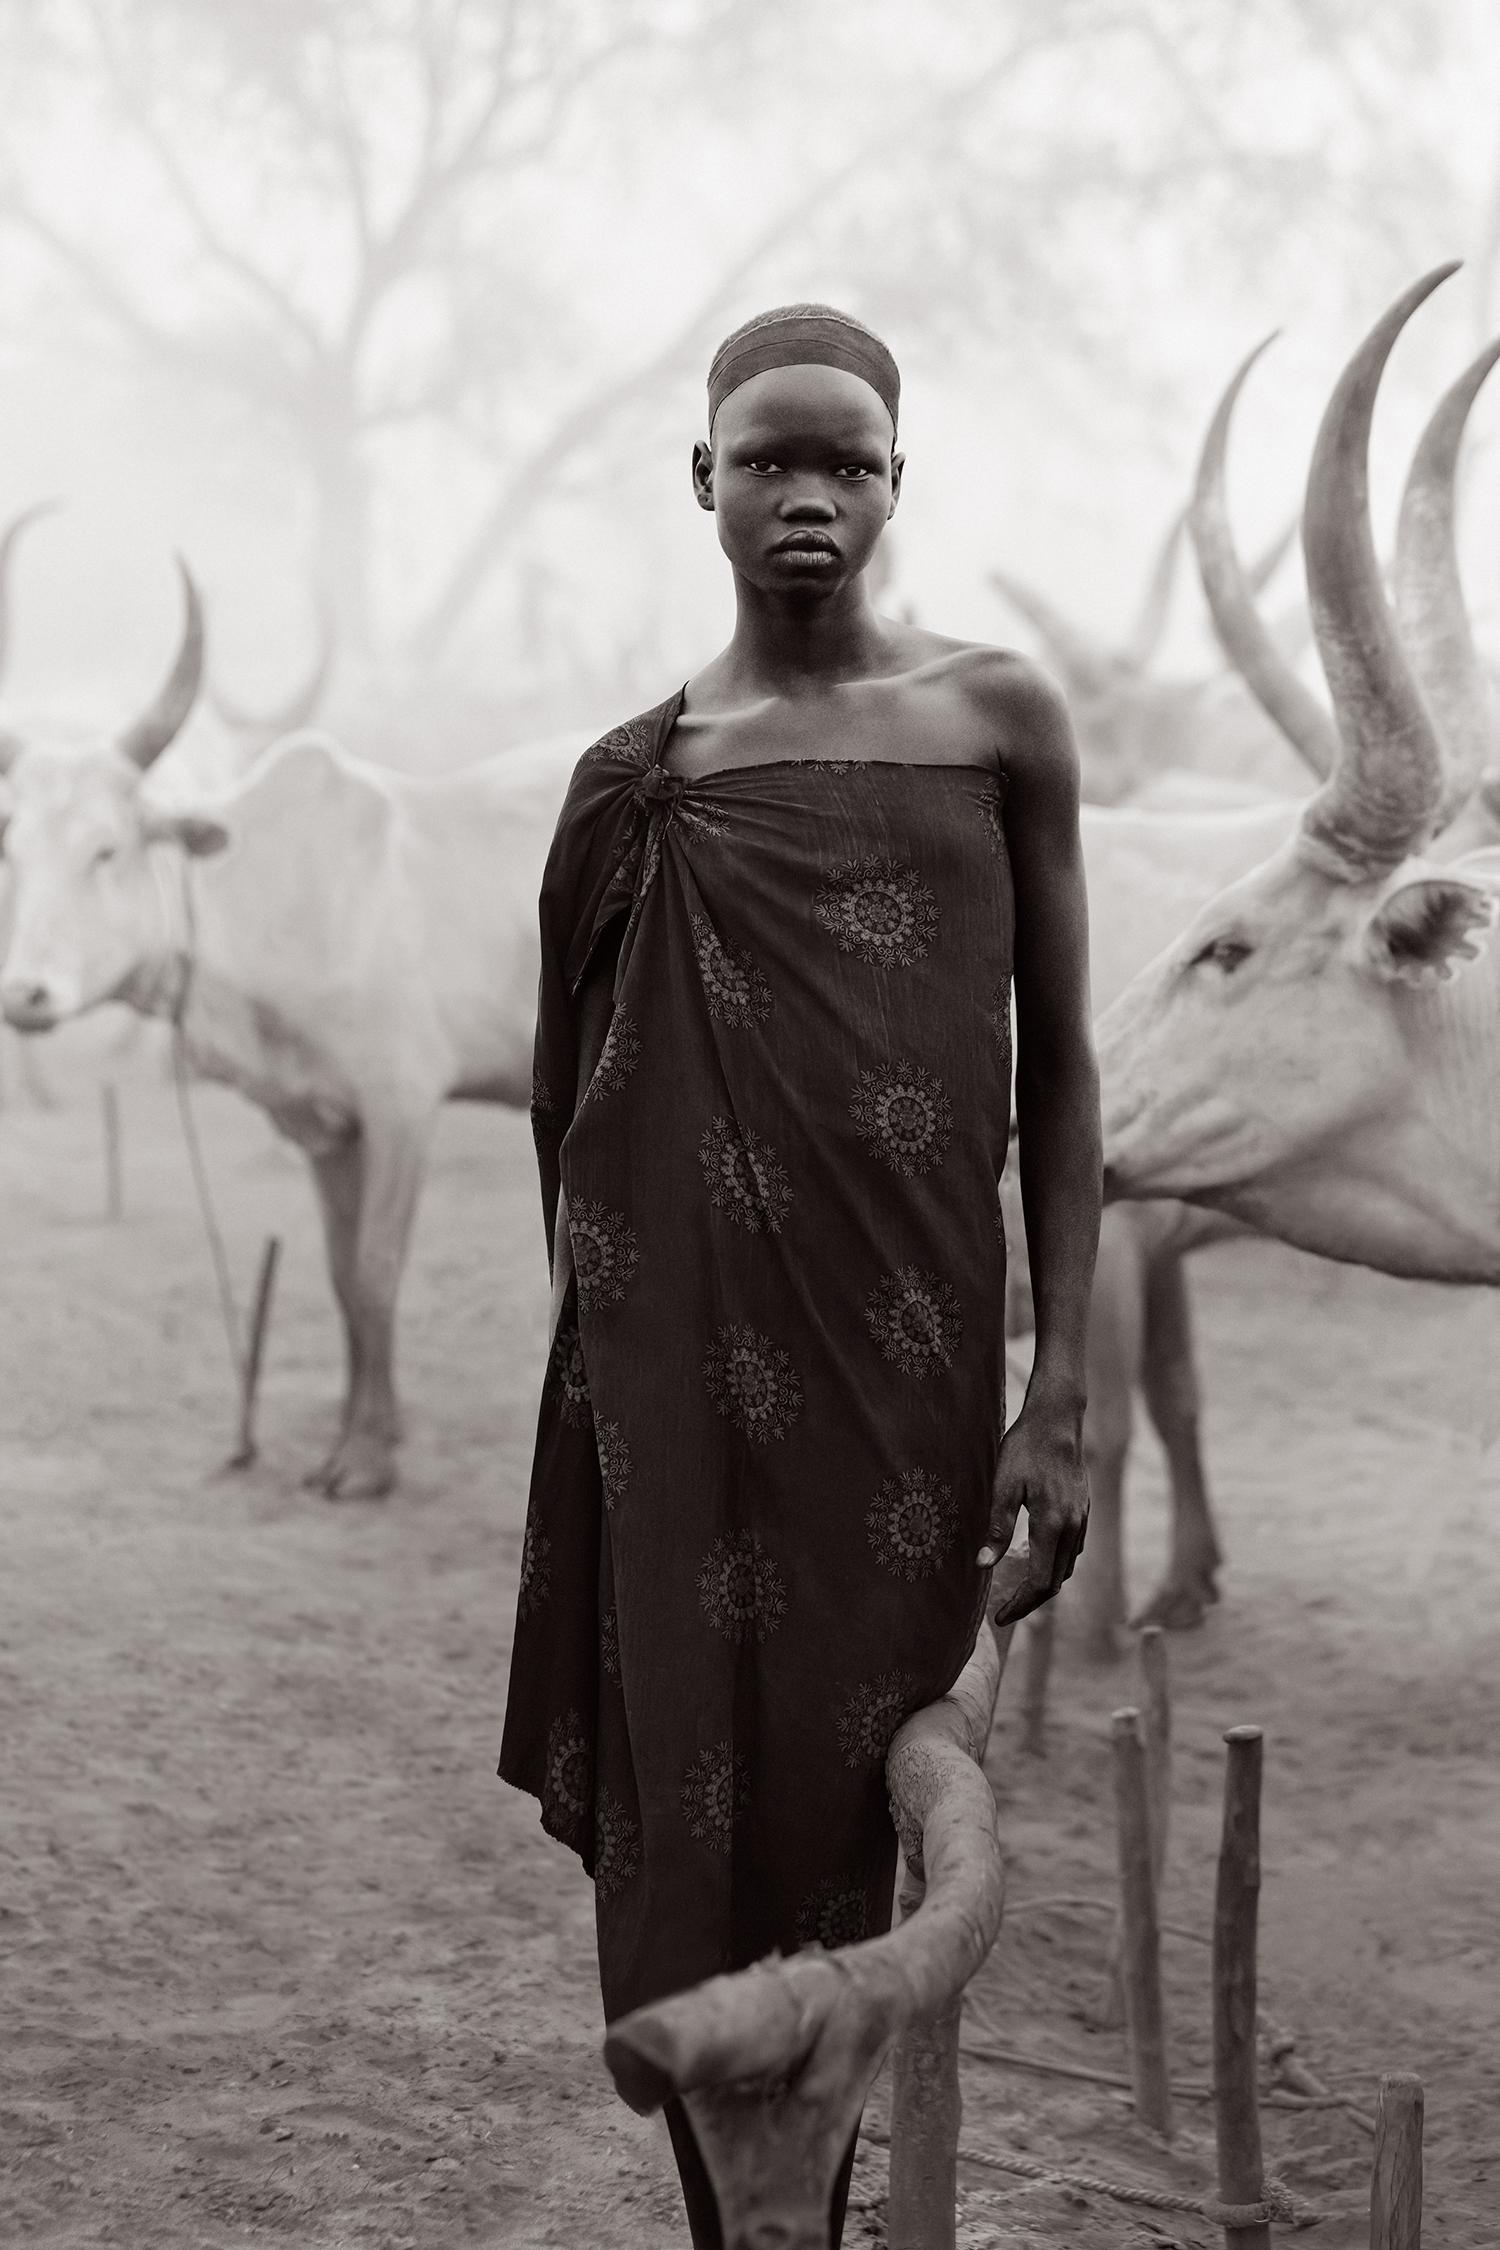 Drew Doggett Black and White Photograph - Cultural Portrait of a Young Boy in South Sudan Amidst the Mundari Cattle Camps